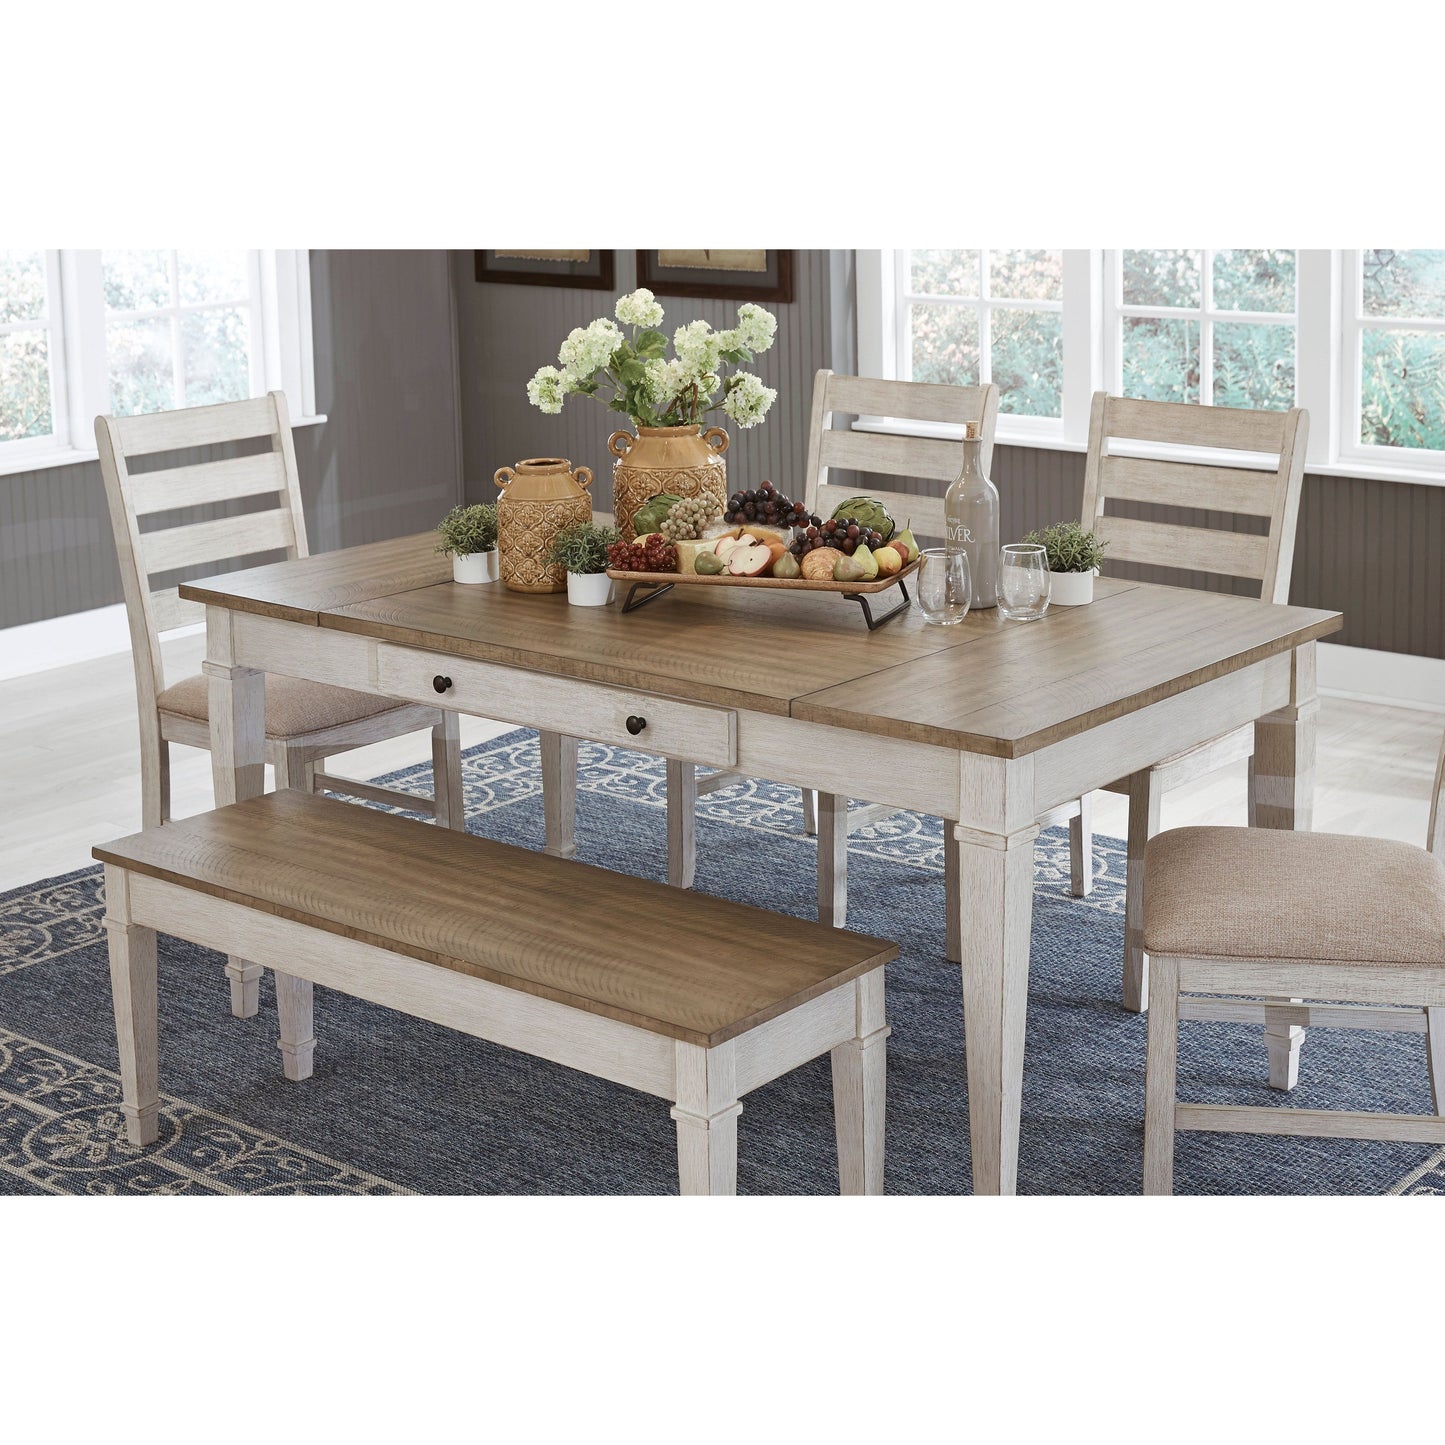 SKEMPTON DINING SET - 6 CHAIRS , TABLE , BENCH